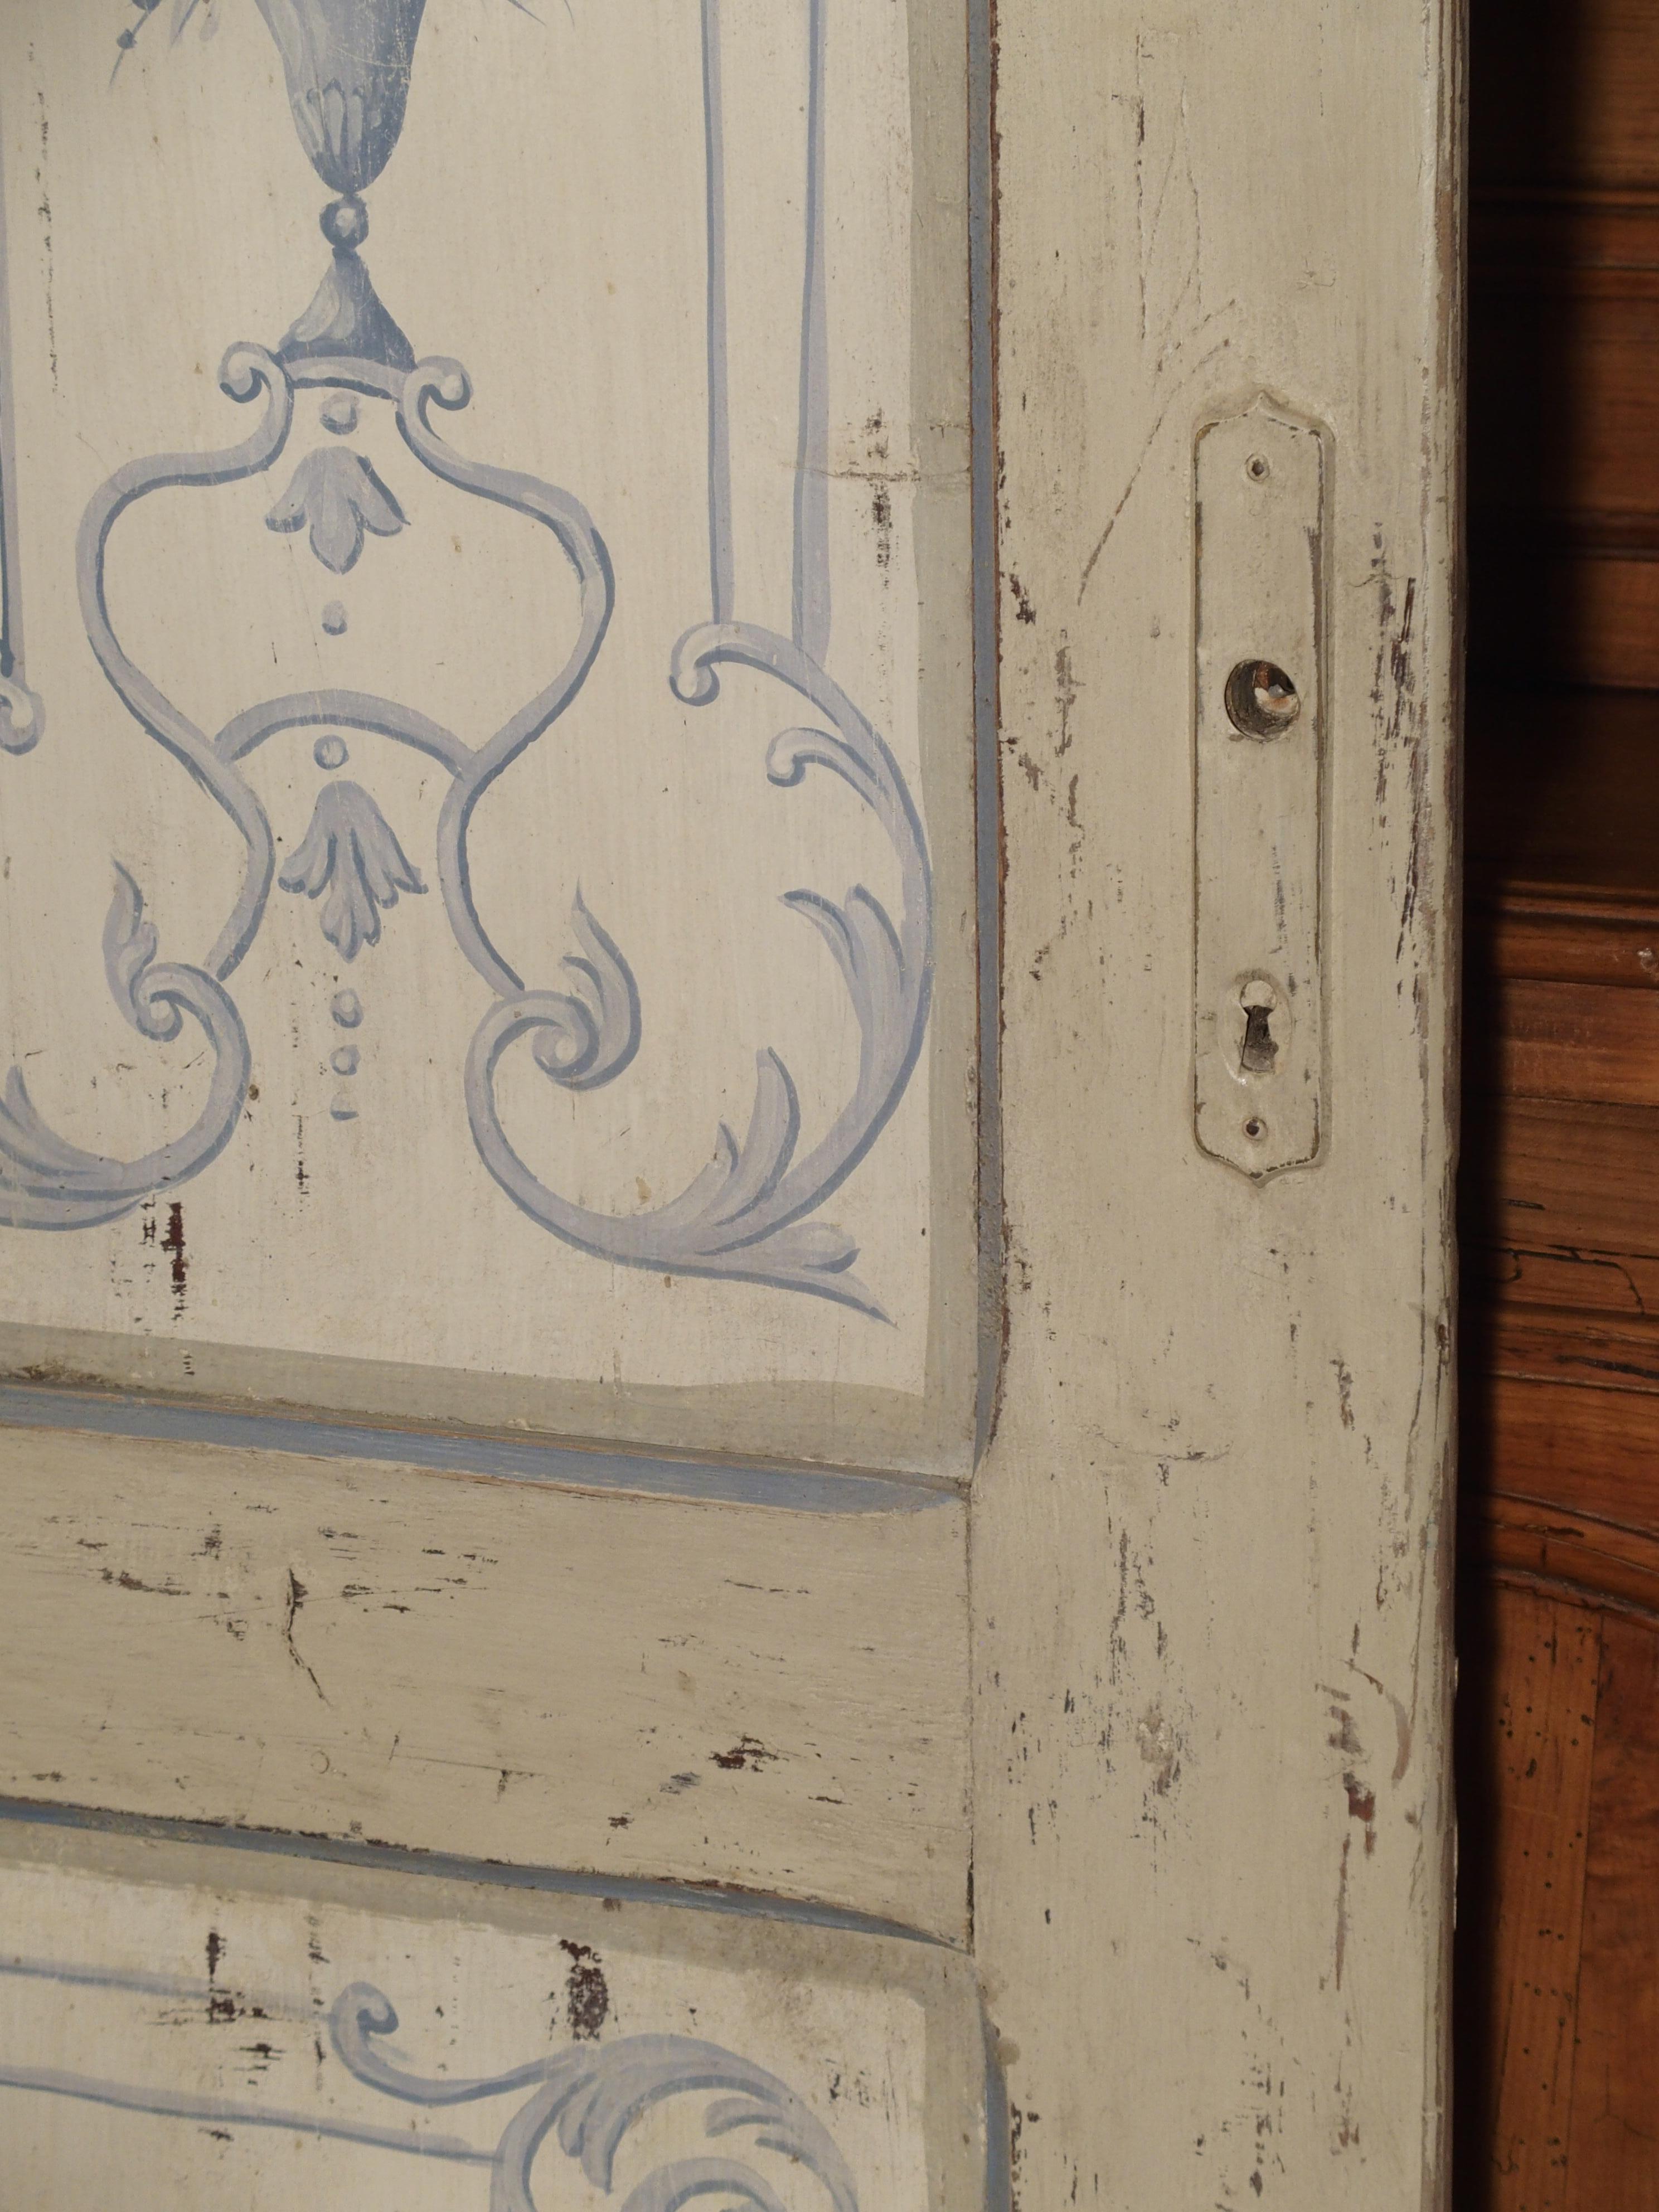 This paneled and double sided interior door was hand painted in Lombardy, Italy circa 1850. Both sides have the same paneling and decoration. The upper two vertical, raised panels have hand painted, delicate neoclassical floral designs. The center